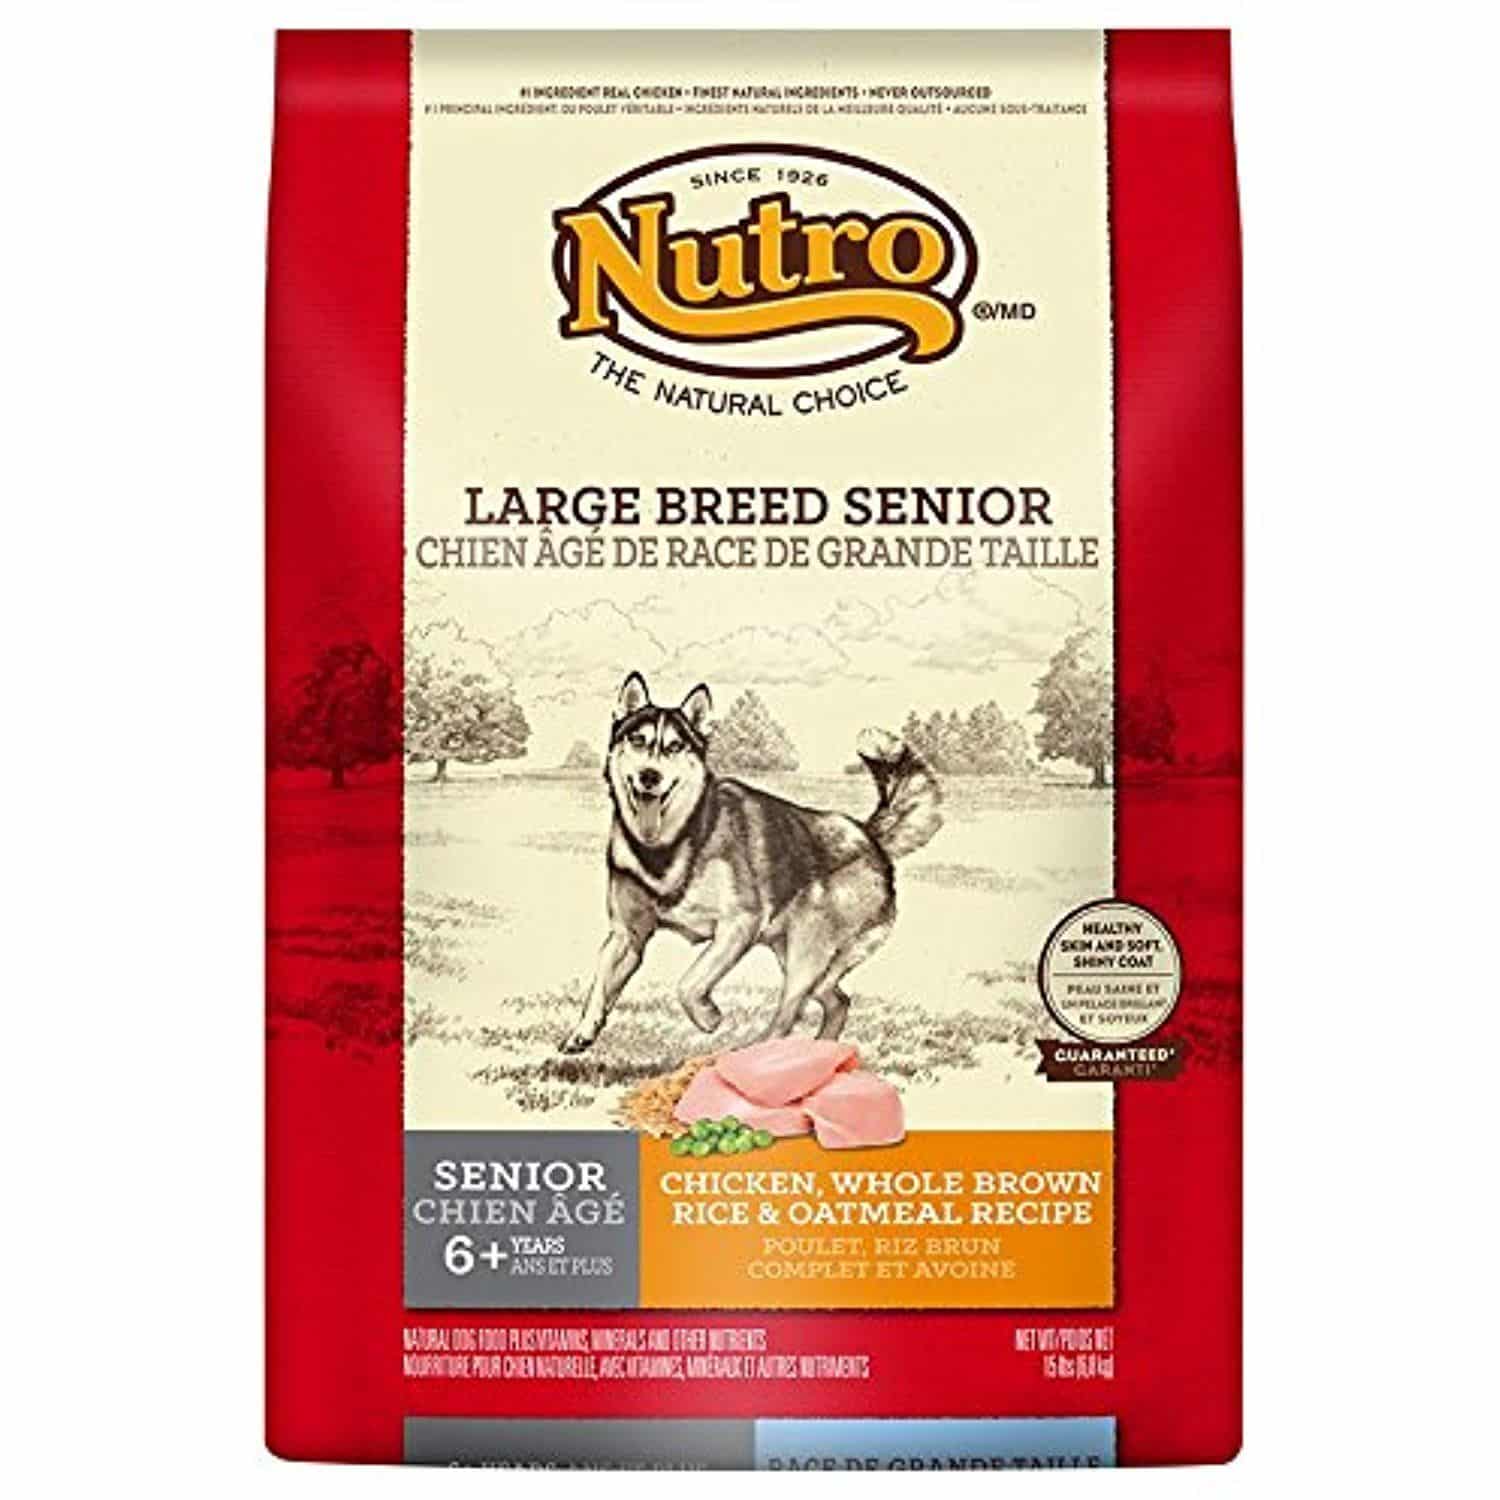 NUTRO Large Breed Senior Chicken, Whole Brown Rice and Oatmeal Dog Food ...